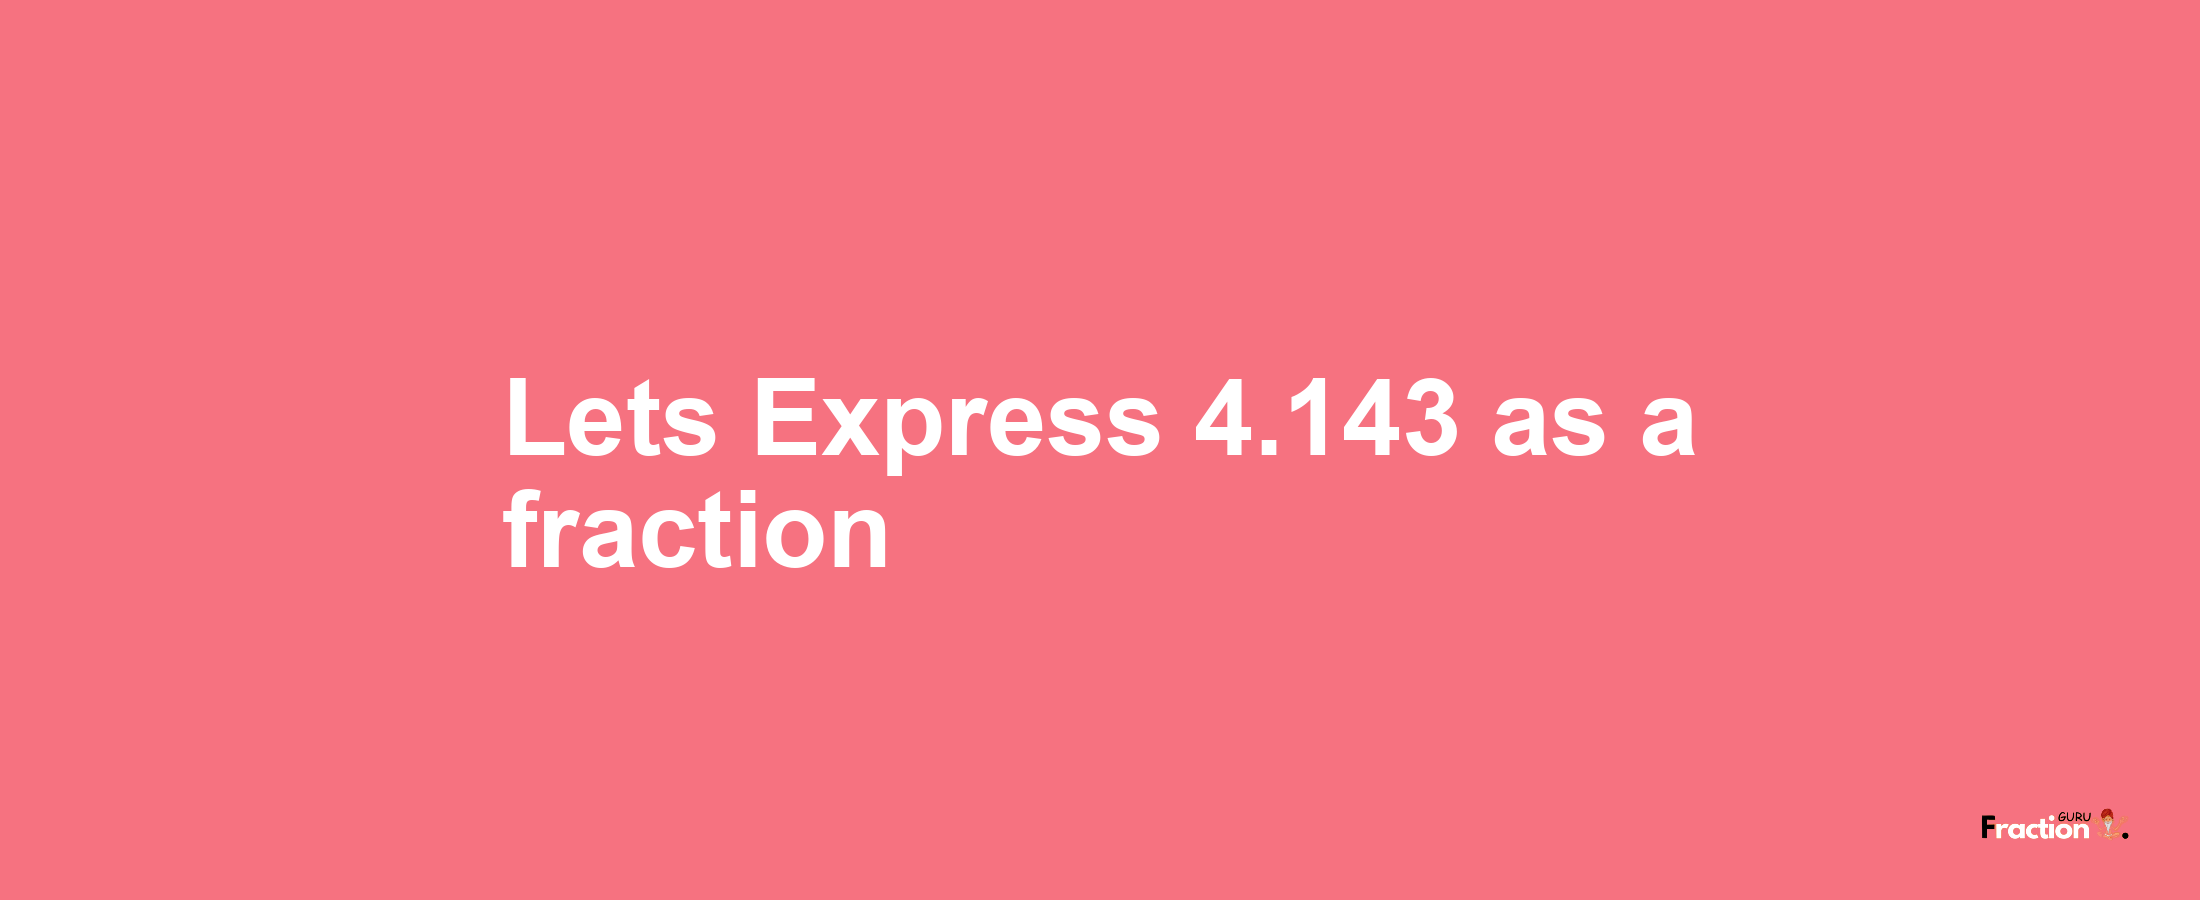 Lets Express 4.143 as afraction